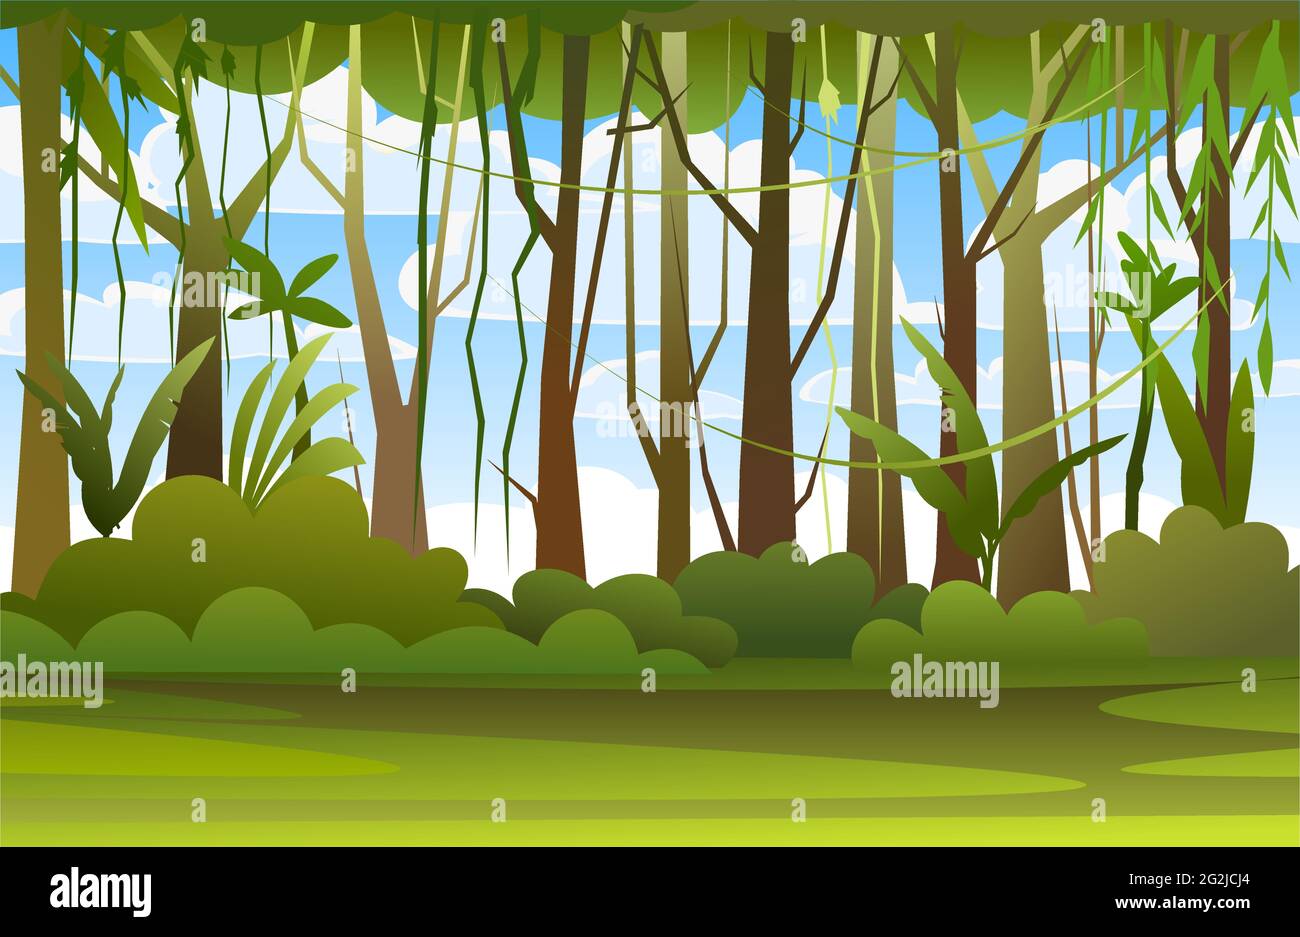 Jungle illustration. Sky. Dense wild-growing tropical plants with tall, branched trunks. Rainforest landscape. Flat design. Cartoon style. Vector Stock Vector